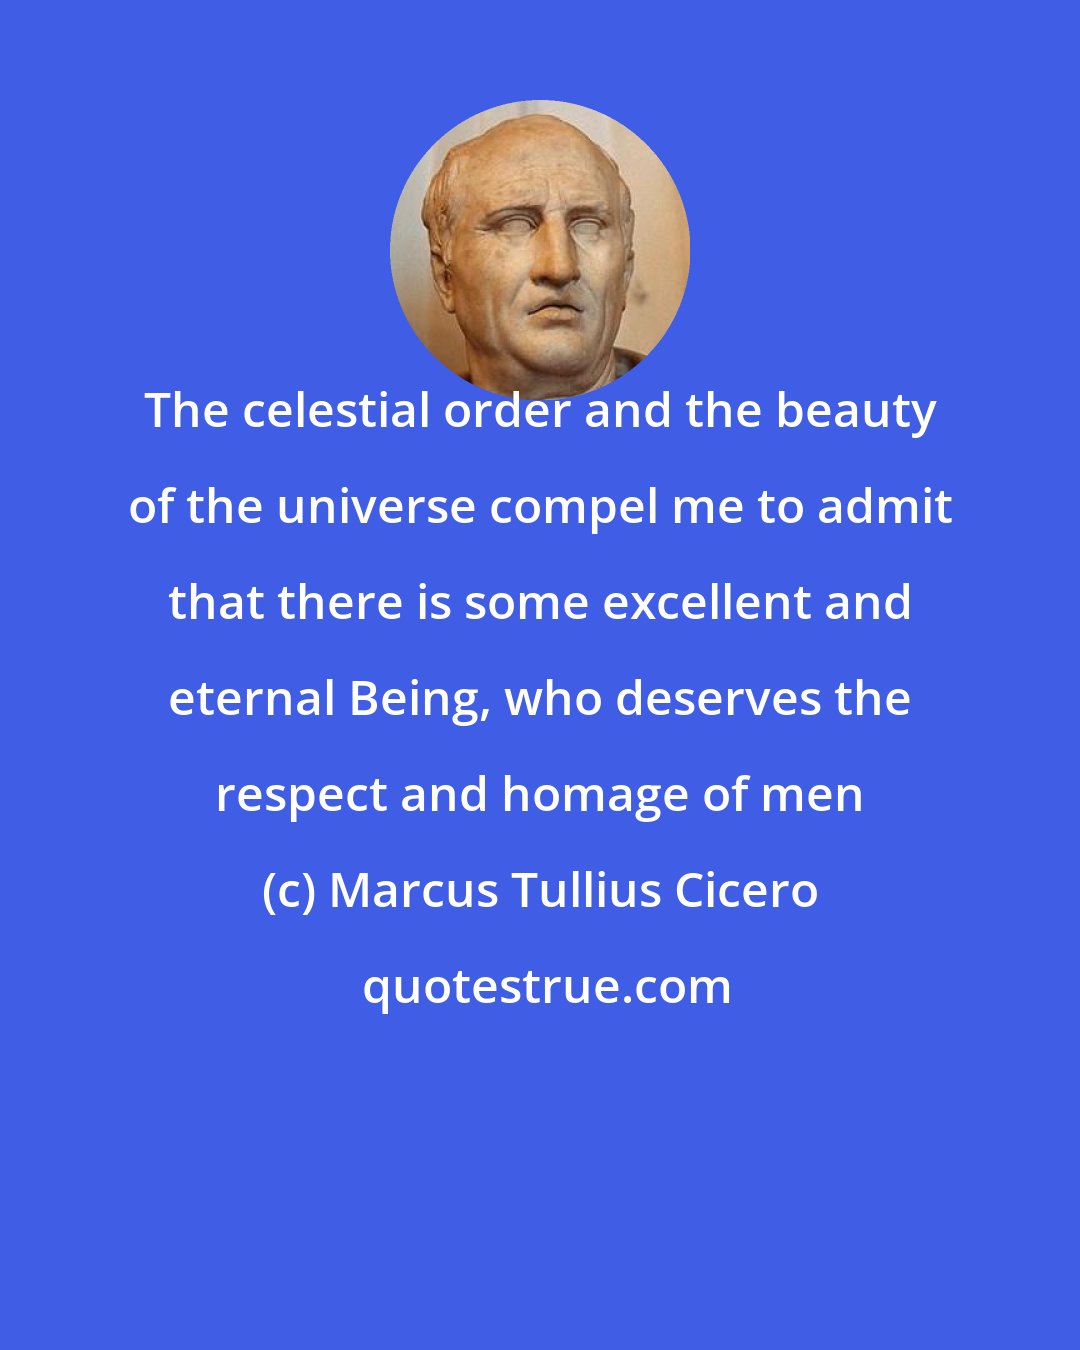 Marcus Tullius Cicero: The celestial order and the beauty of the universe compel me to admit that there is some excellent and eternal Being, who deserves the respect and homage of men